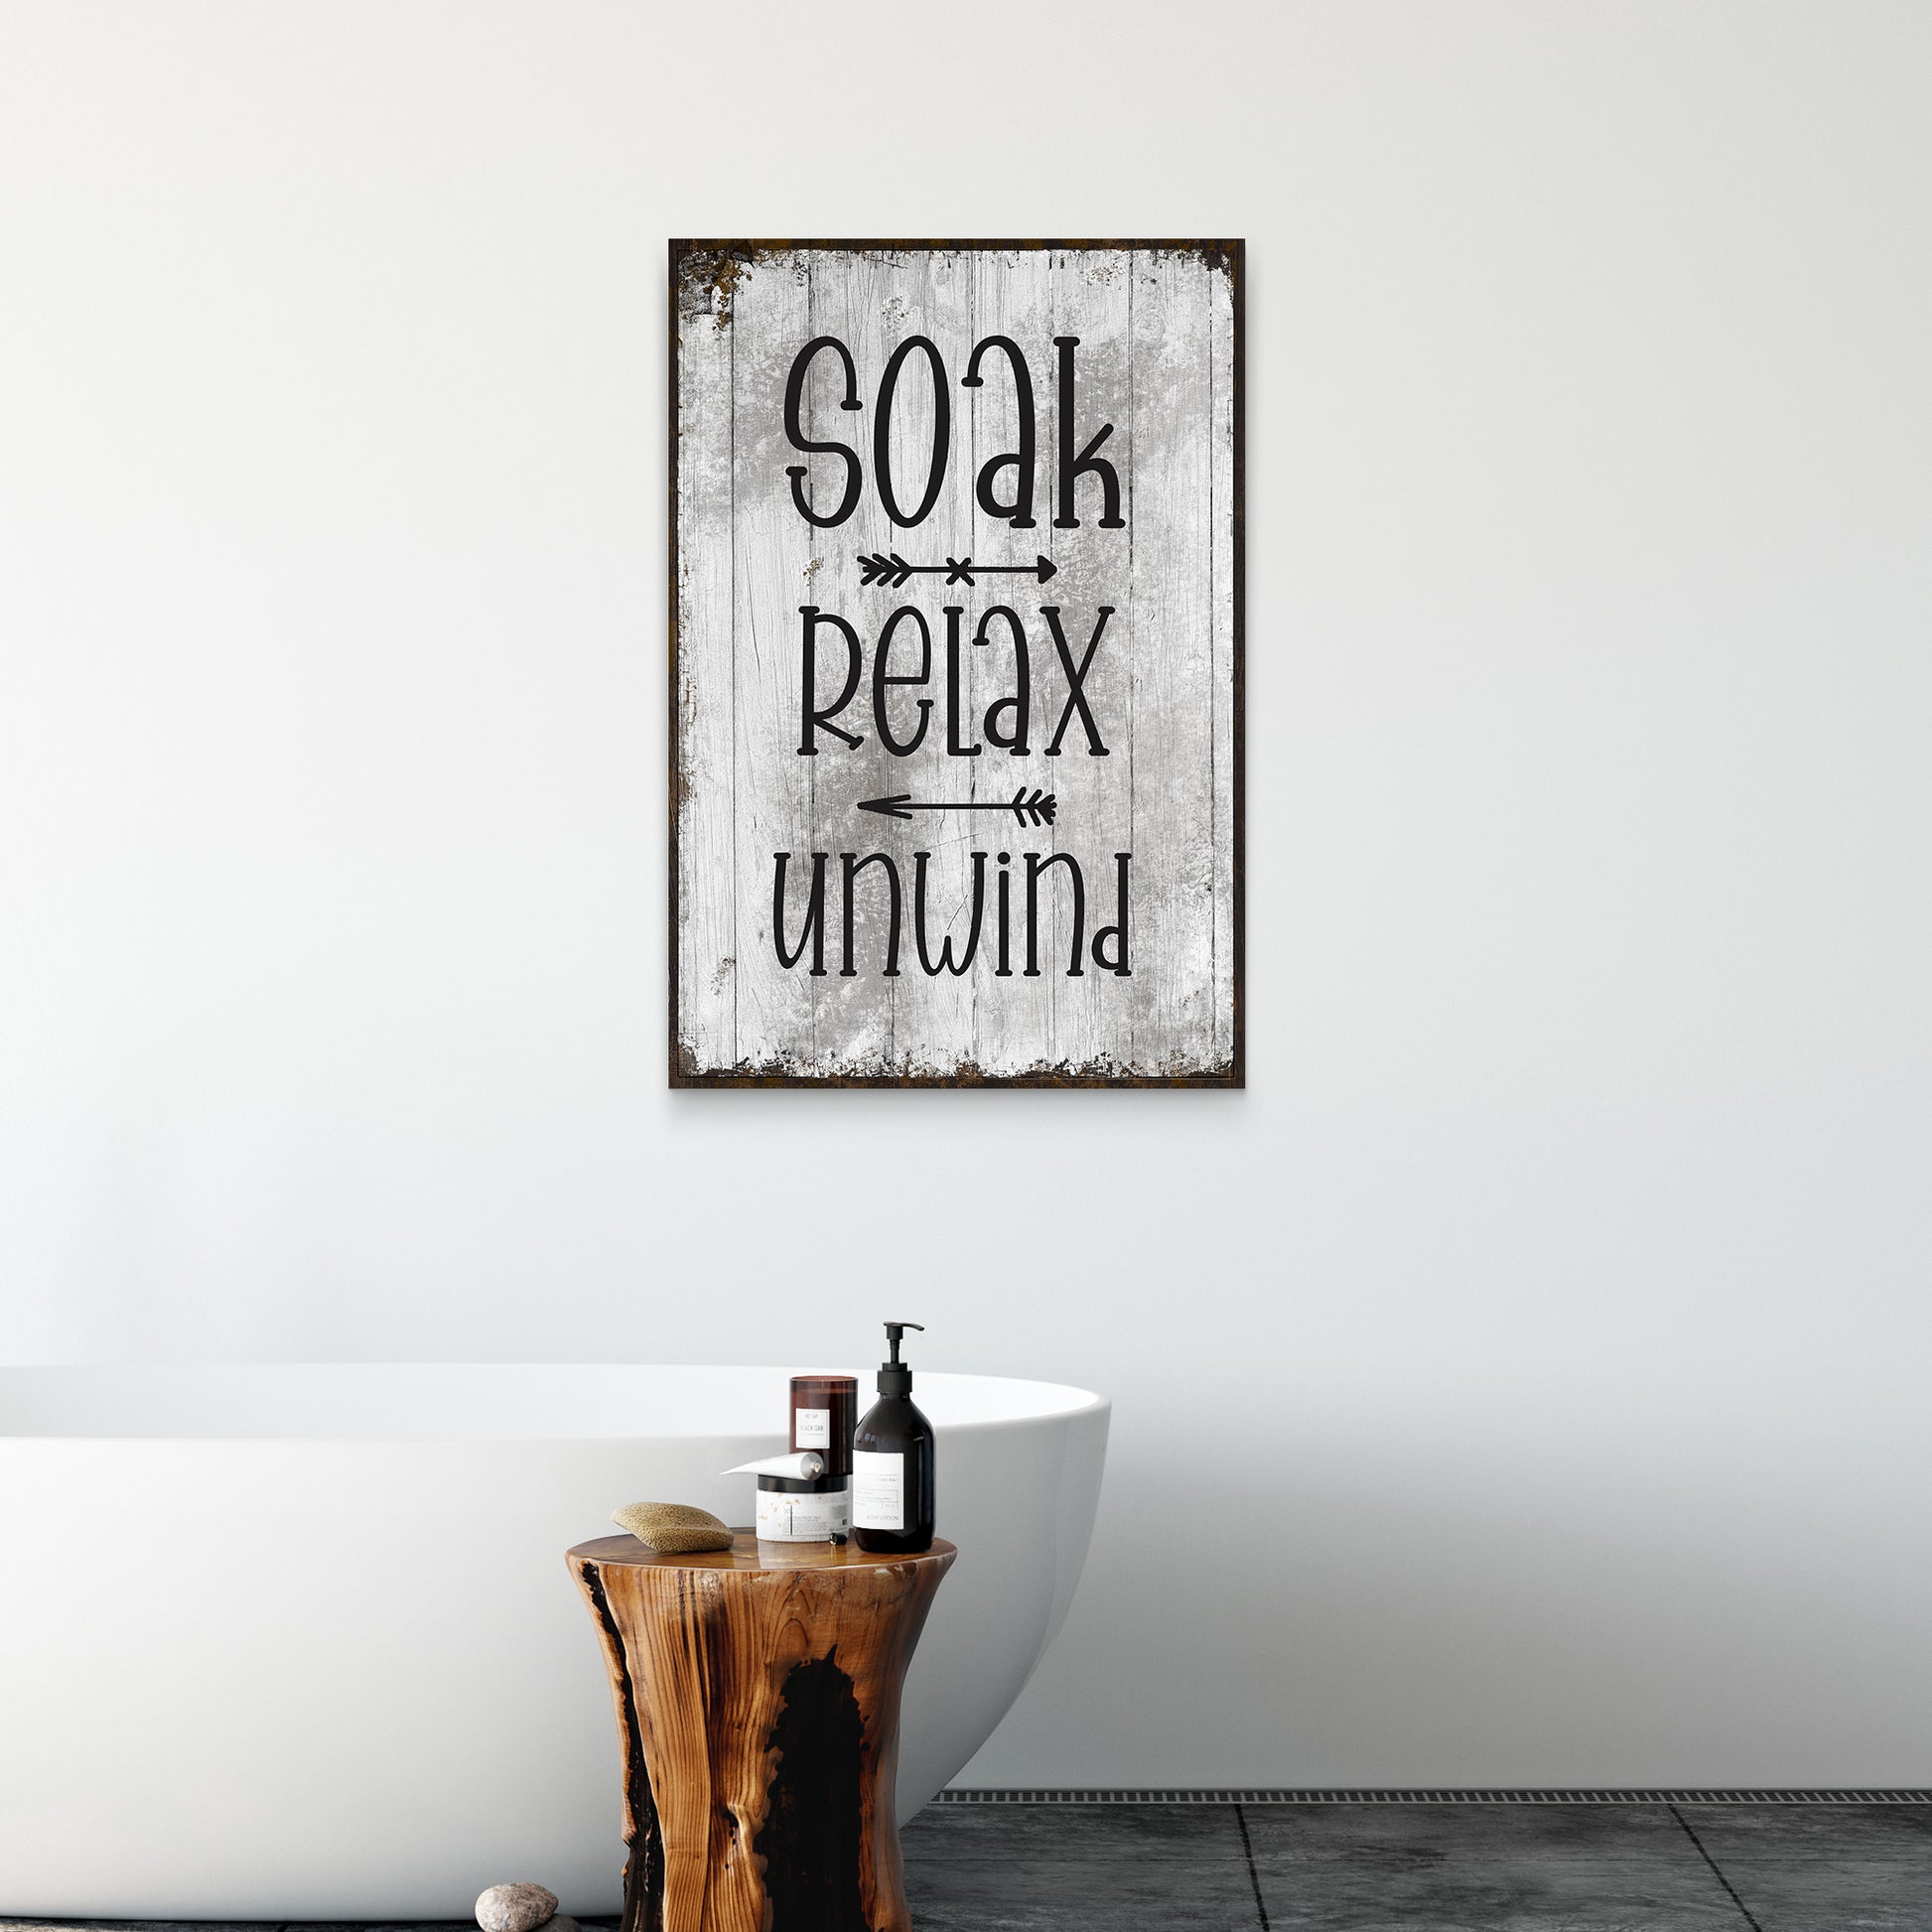 Soak, Relax, Unwind Sign - Image by Tailored Canvases